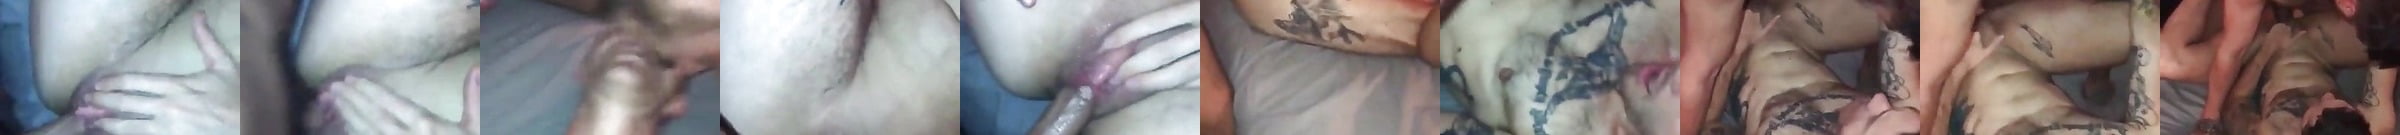 Featured Ftm Creampie Gay Porn Videos XHamster